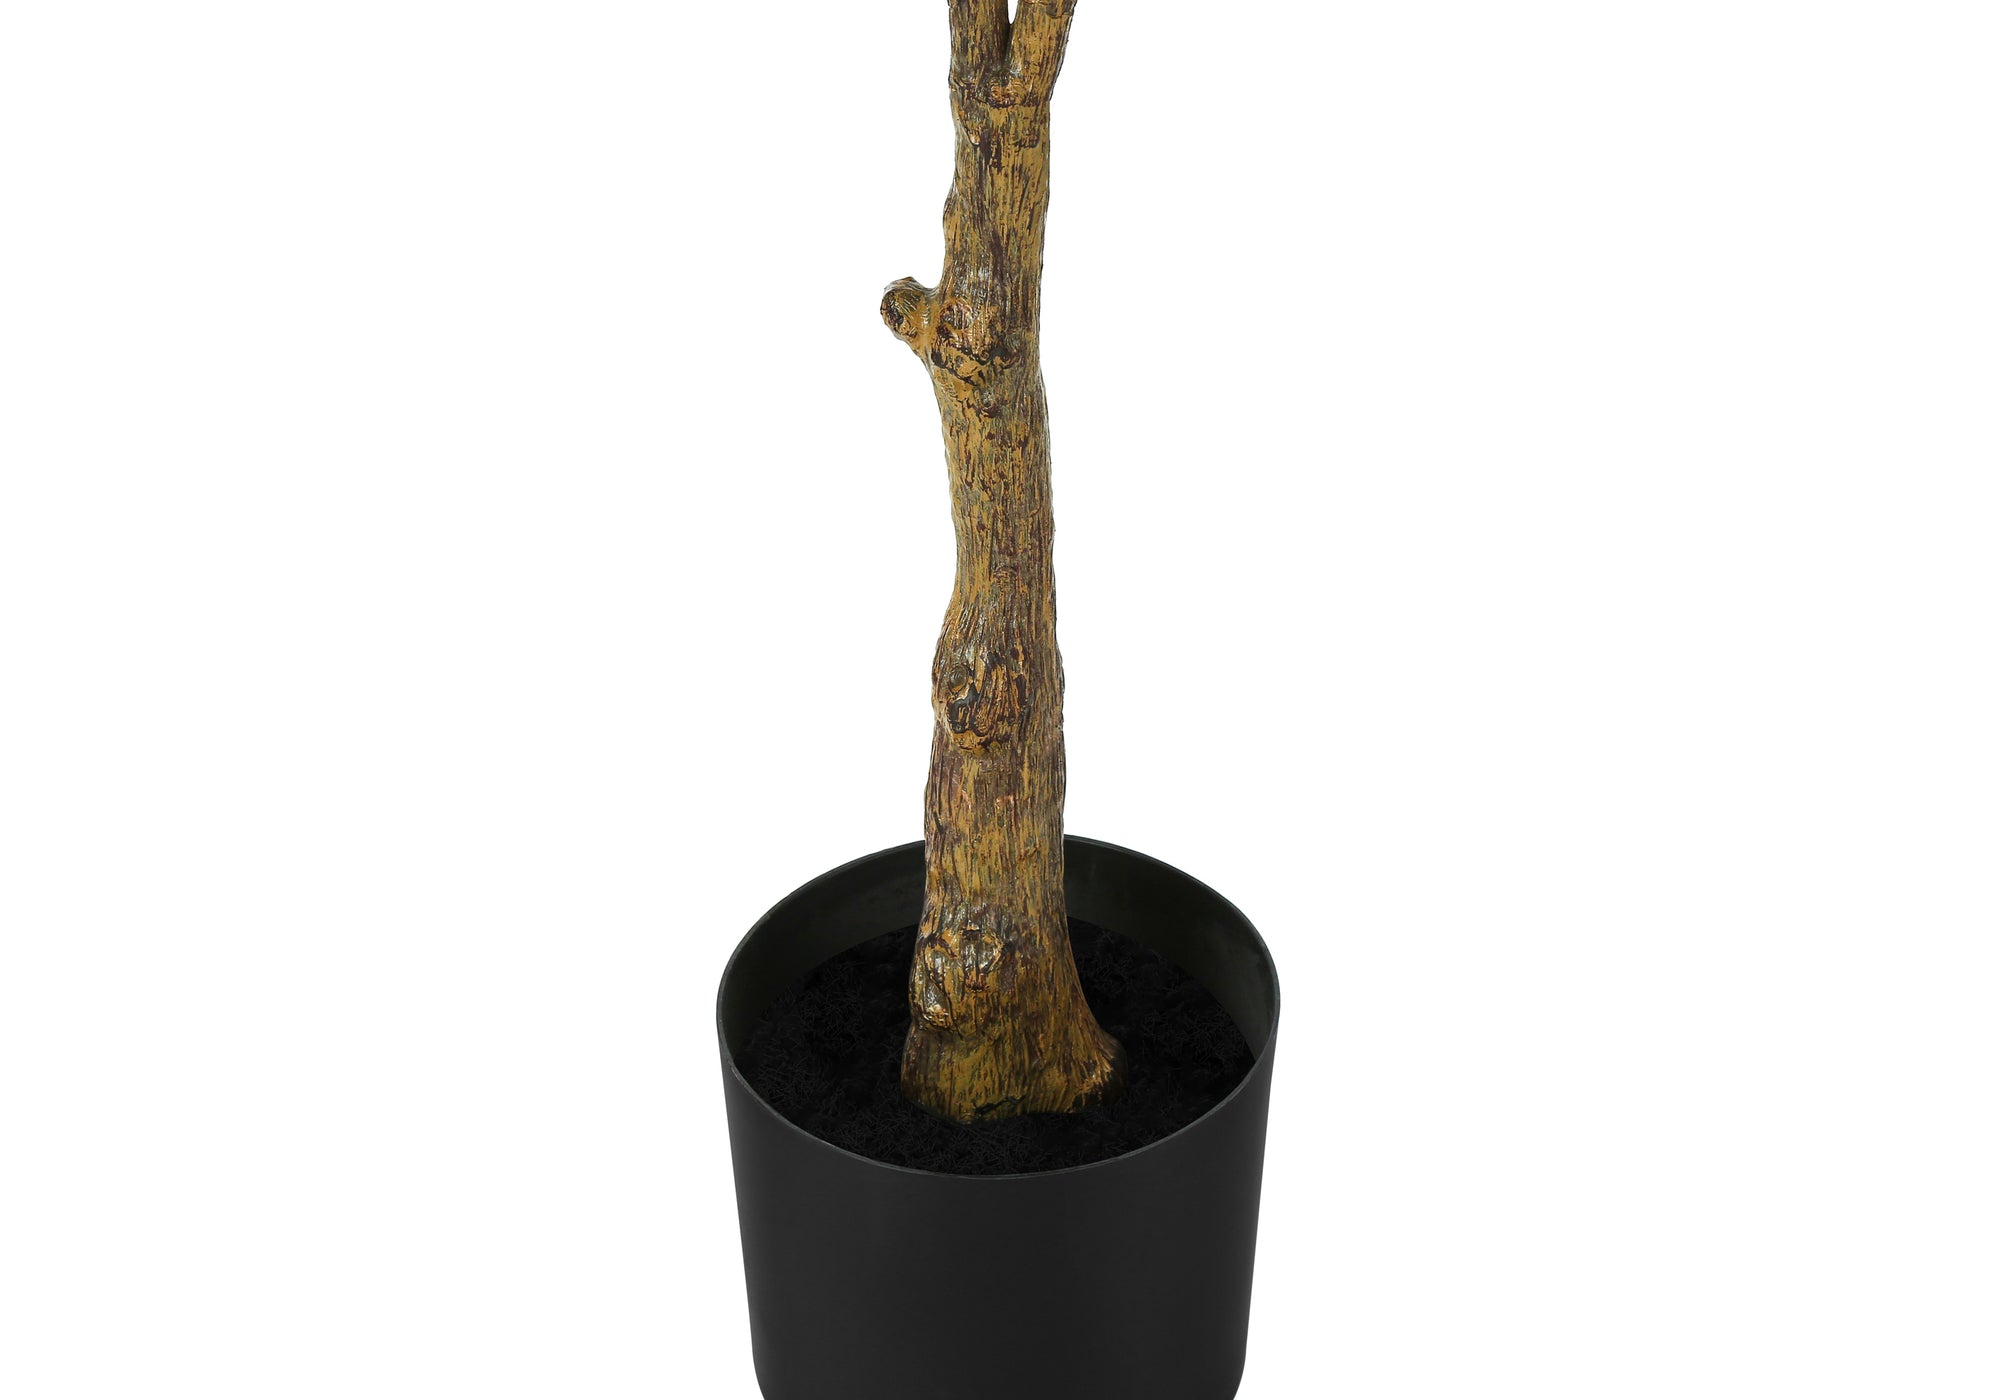 MN-349513    Artificial Plant, 52" Tall, Rubber Tree, Indoor, Faux, Fake, Floor, Greenery, Potted, Real Touch, Decorative, Green Leaves, Black Pot